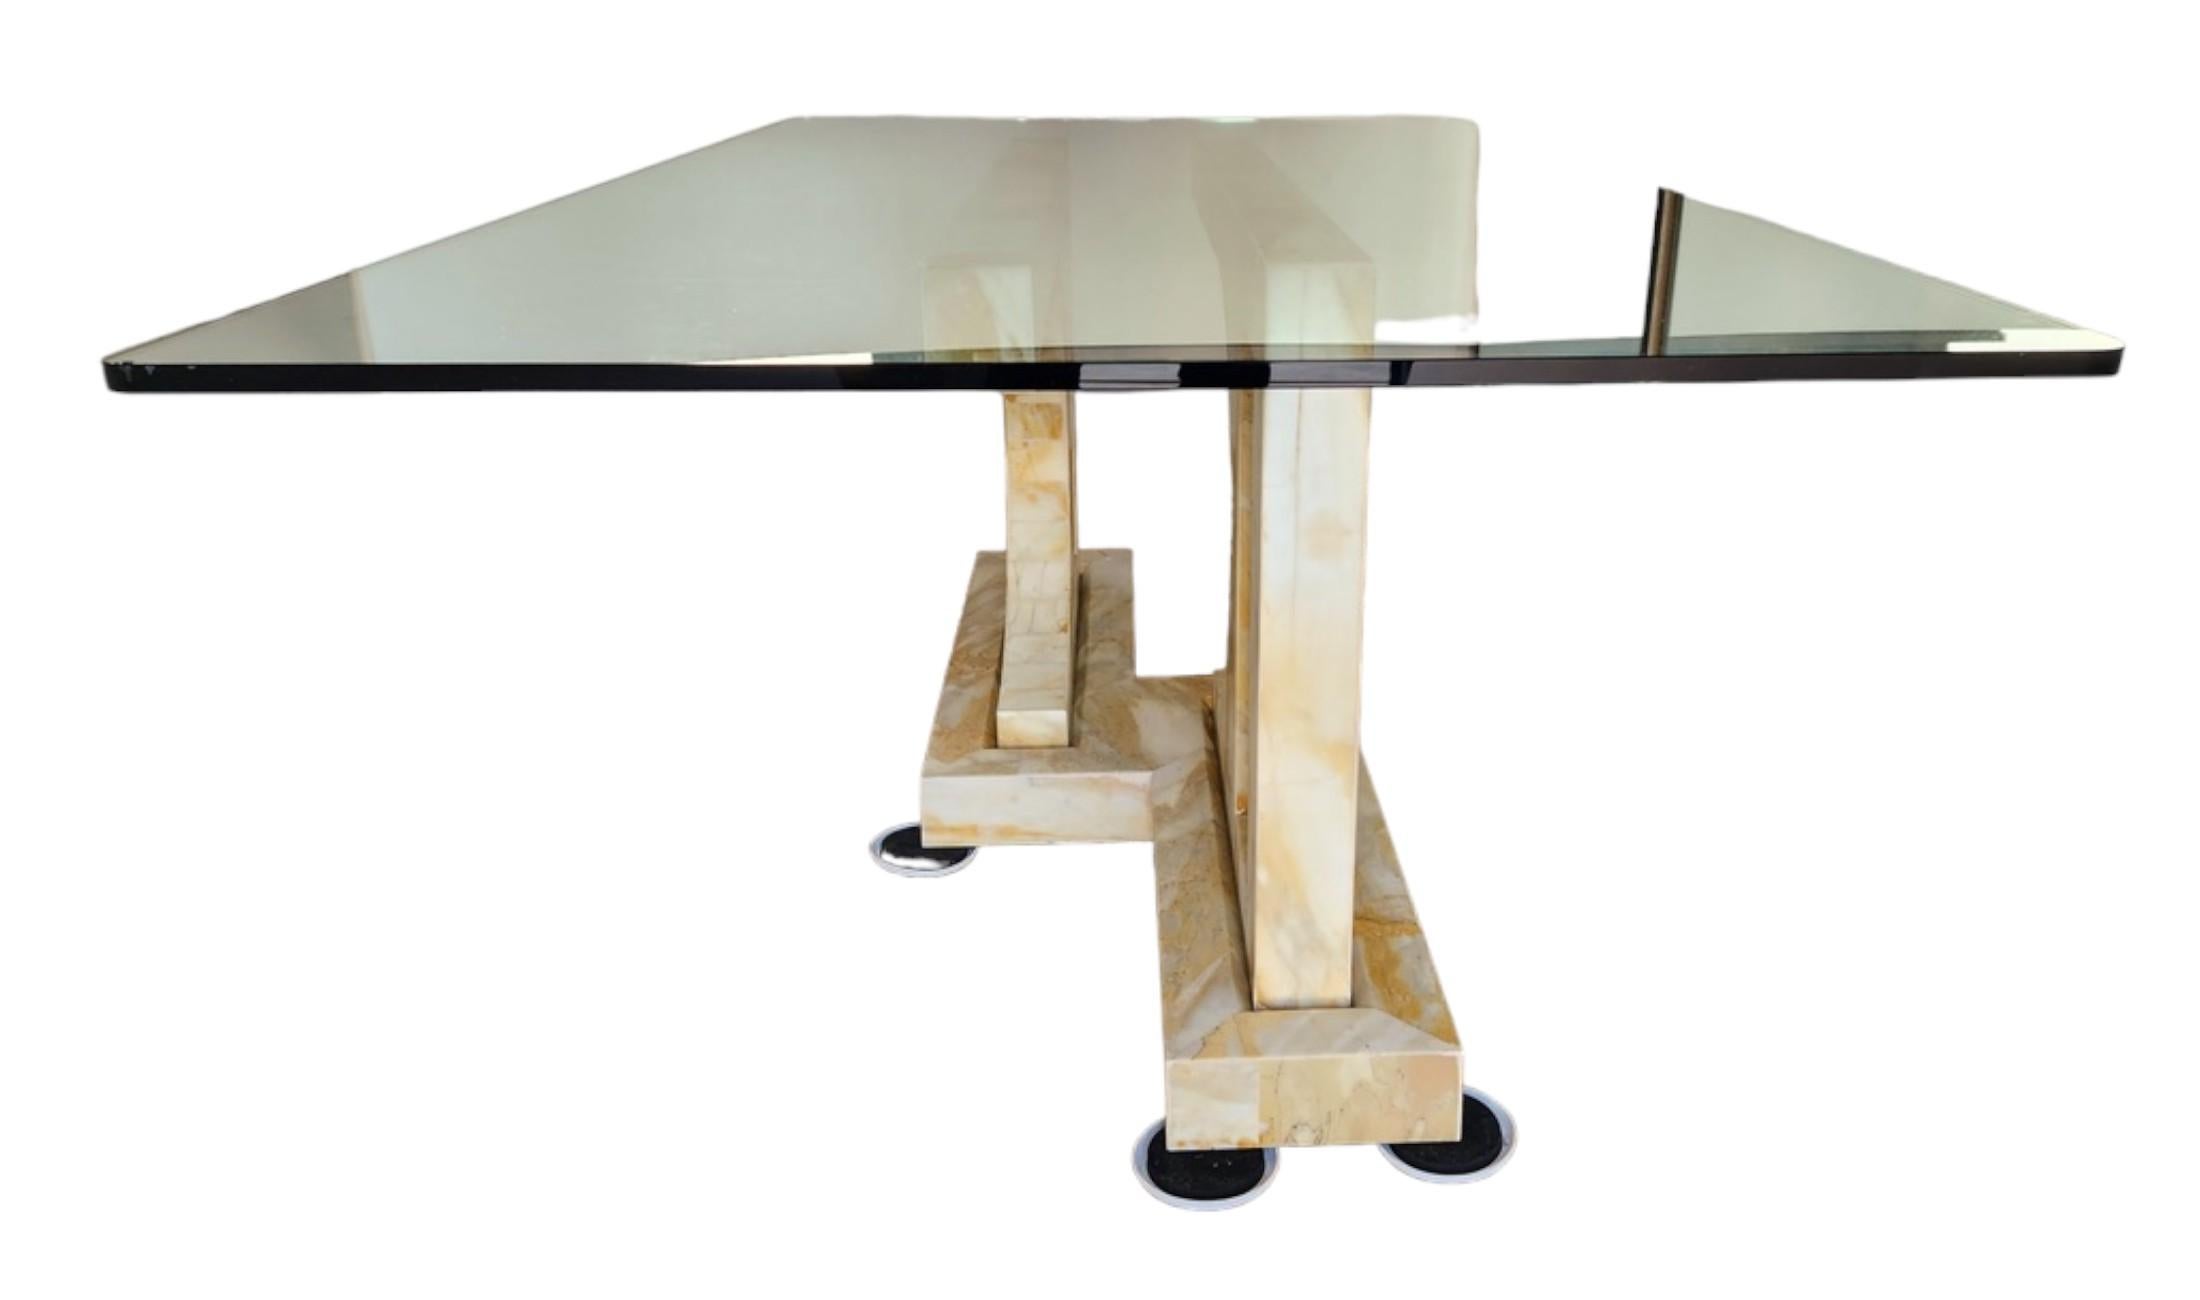 A rare commissioned marble table base designed and fabricated by Paul Puccio for a client signed and dated 1976.
The base is made from Giallo Siena Marble one of the most beautiful, prestigious and detailed marbles mined in Italy.
Puccio Marble and